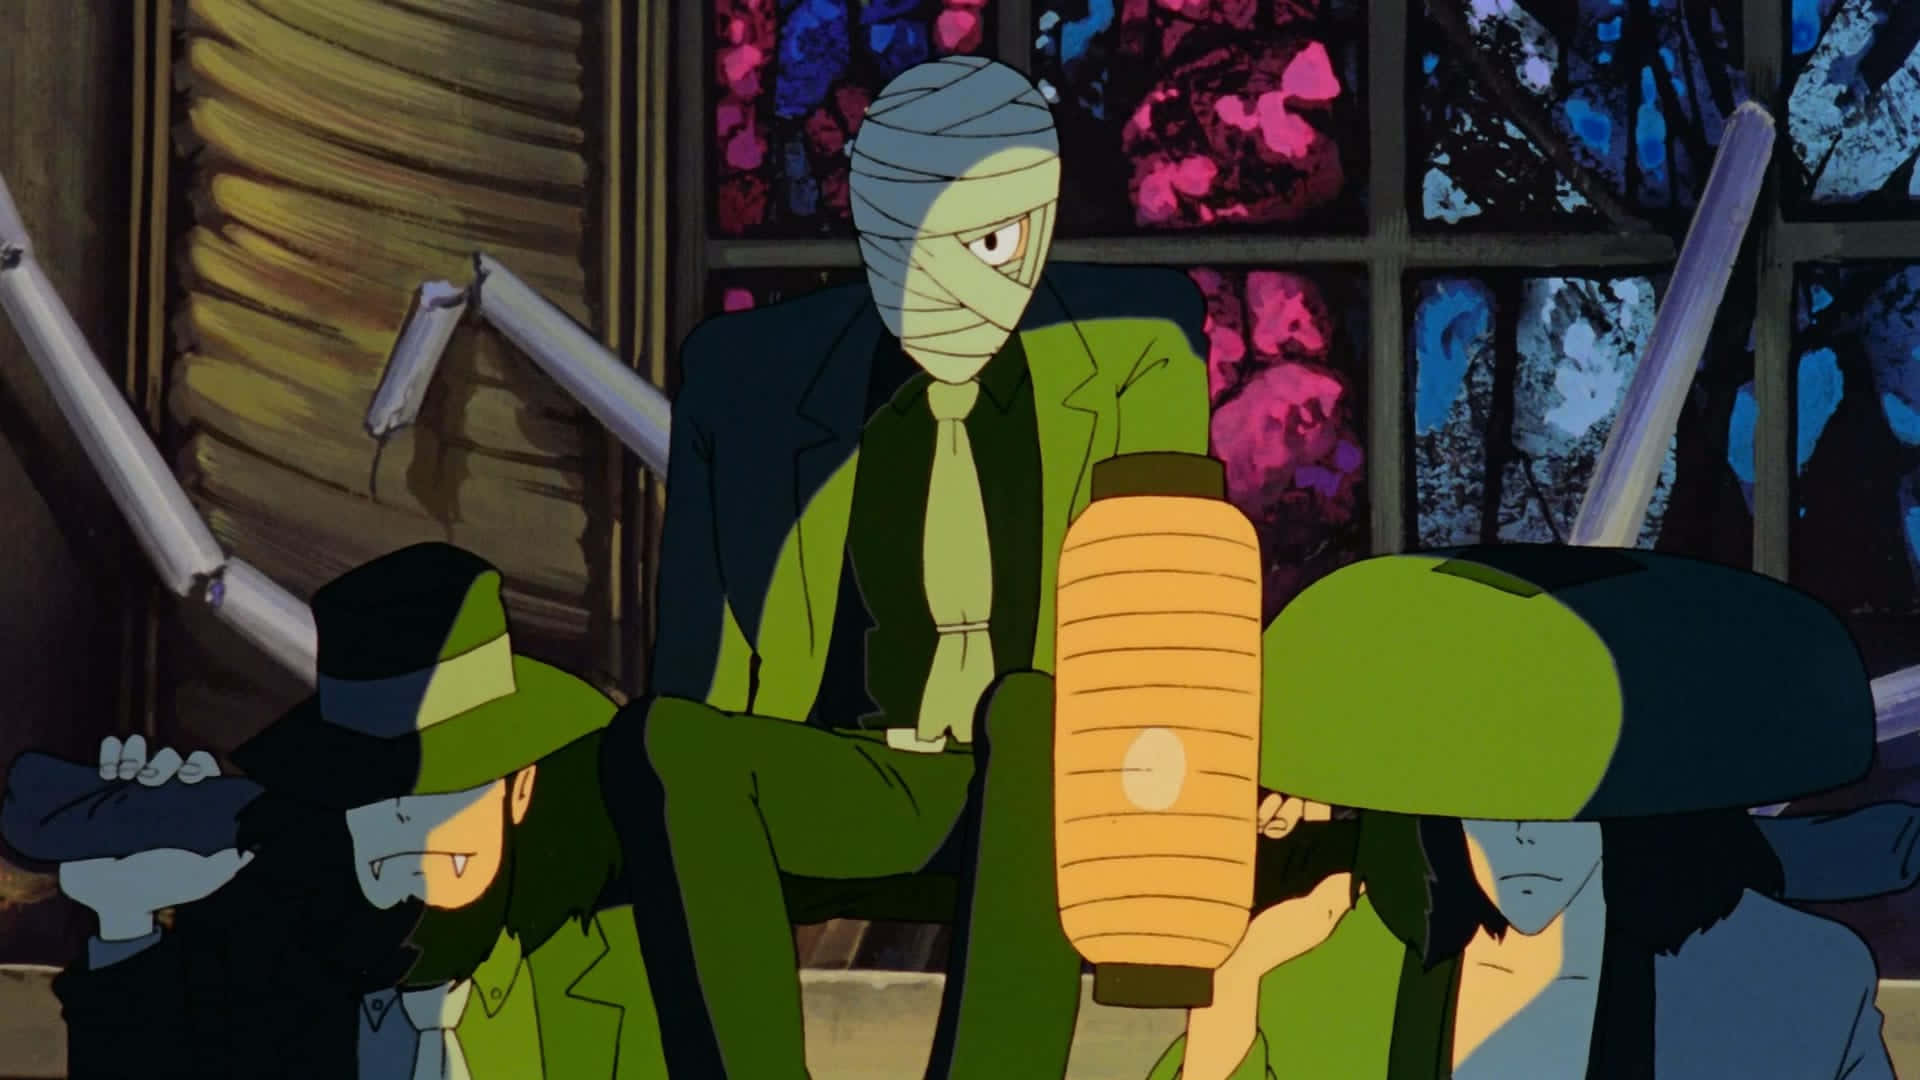 Lupin III and his crew in an action-packed scene from The Castle of Cagliostro Wallpaper